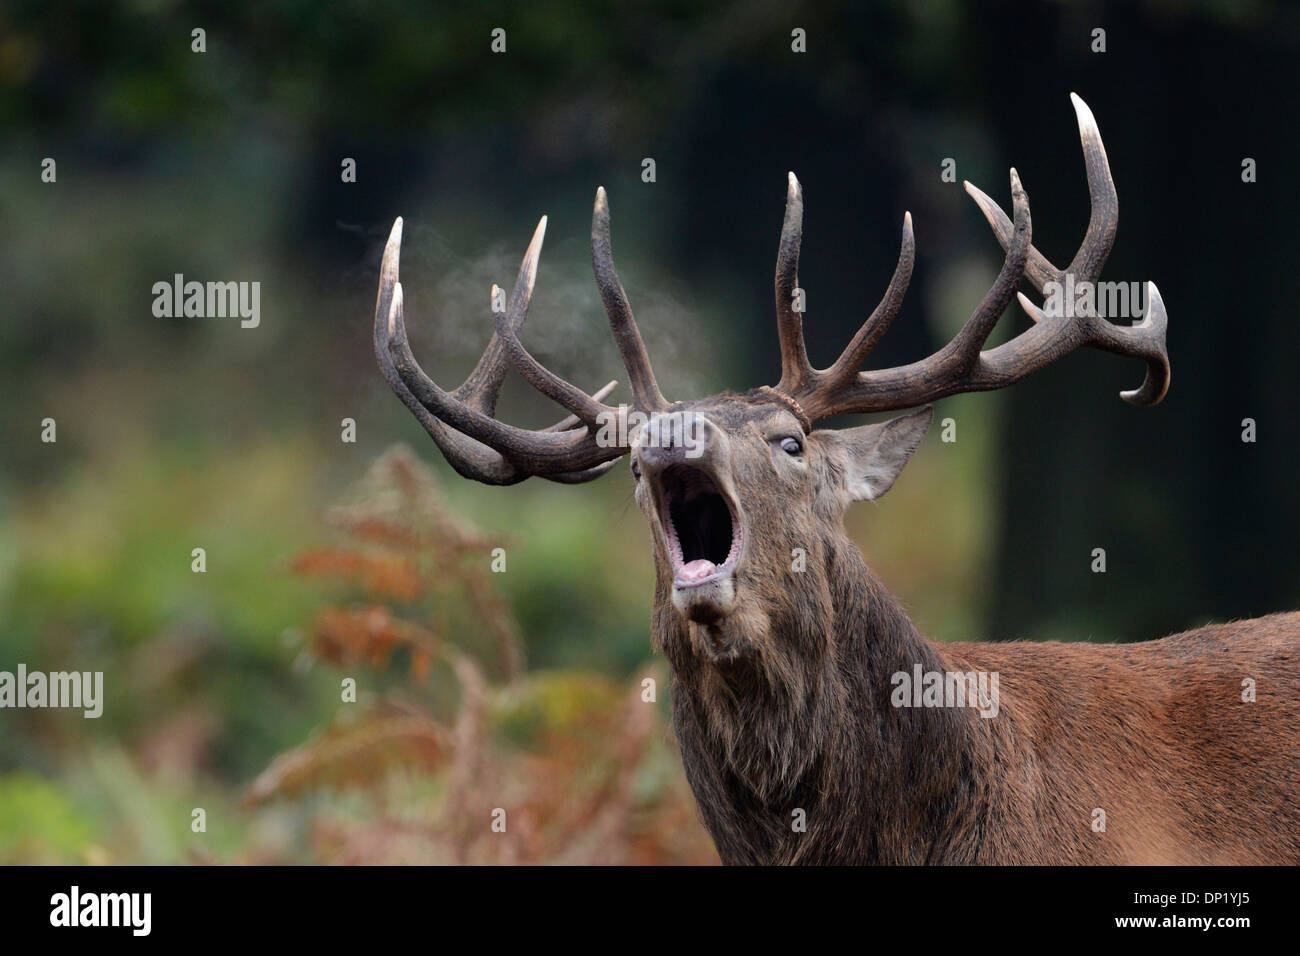 Red deer (Cervus elaphus). Stag roaring during the autumnal rut. The breath of the stag is clearly visible before the antlers. Stock Photo